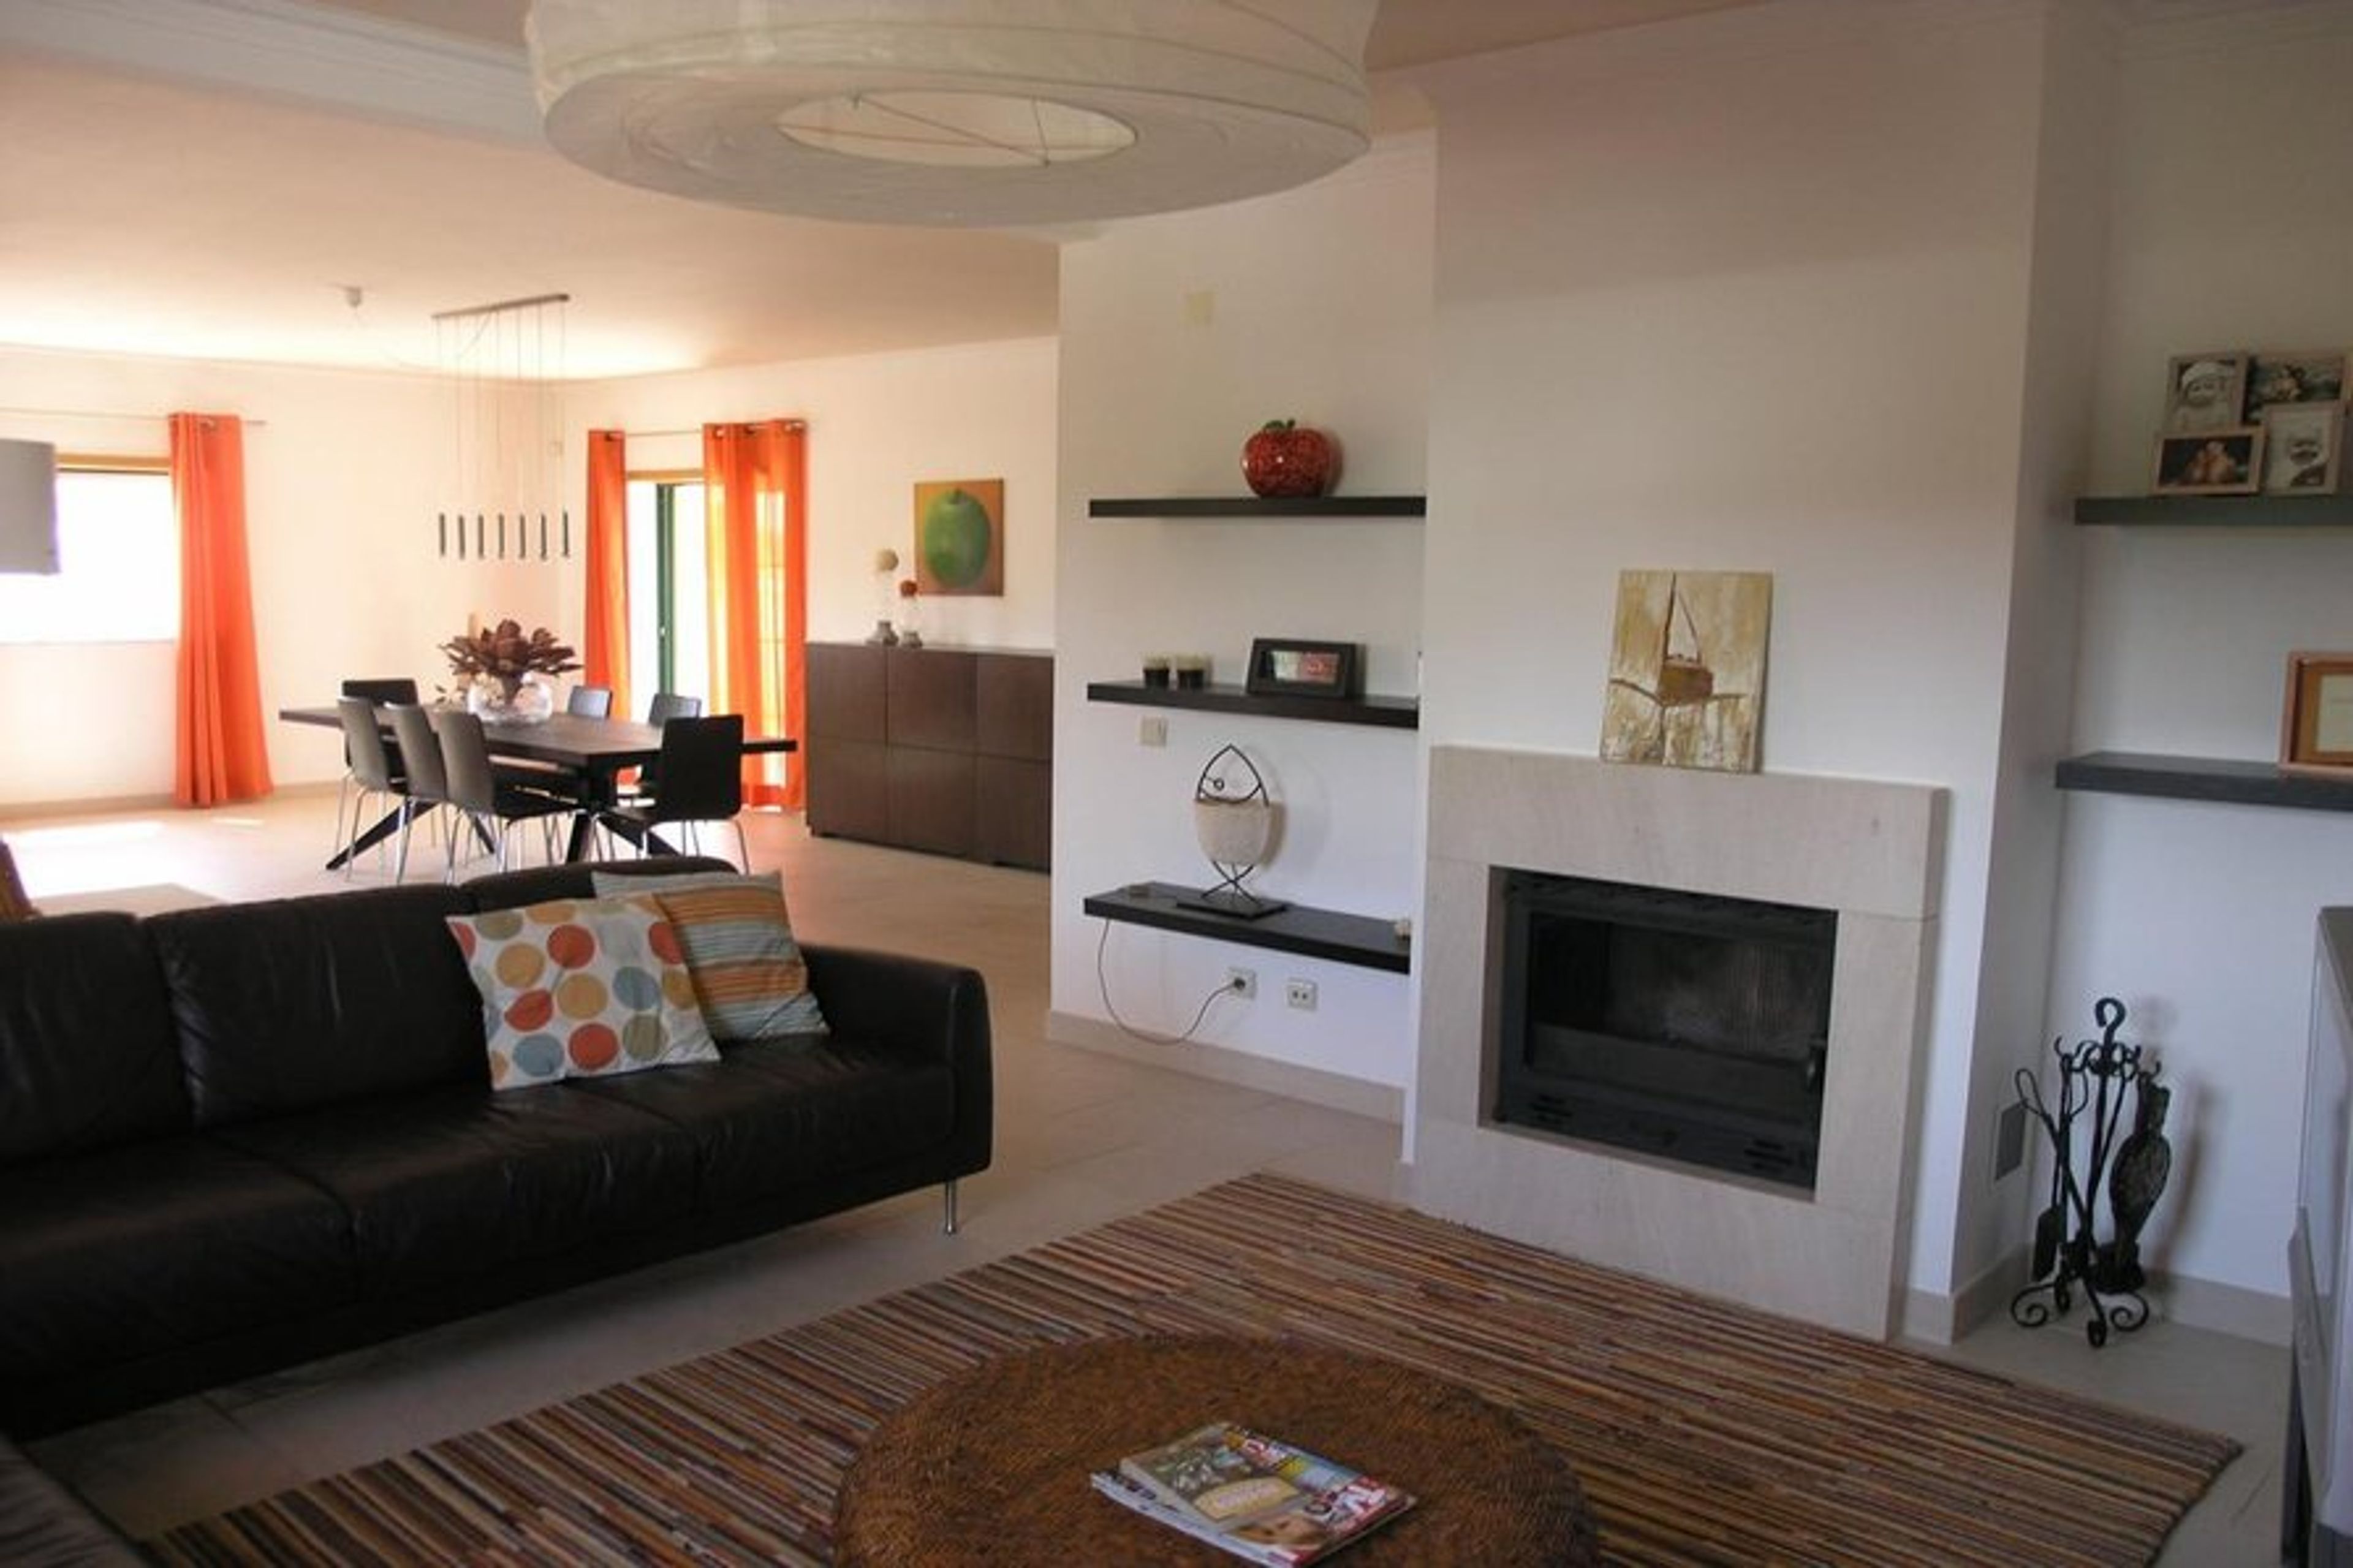 The lounge area with L-shaped sofa, TV and log fire